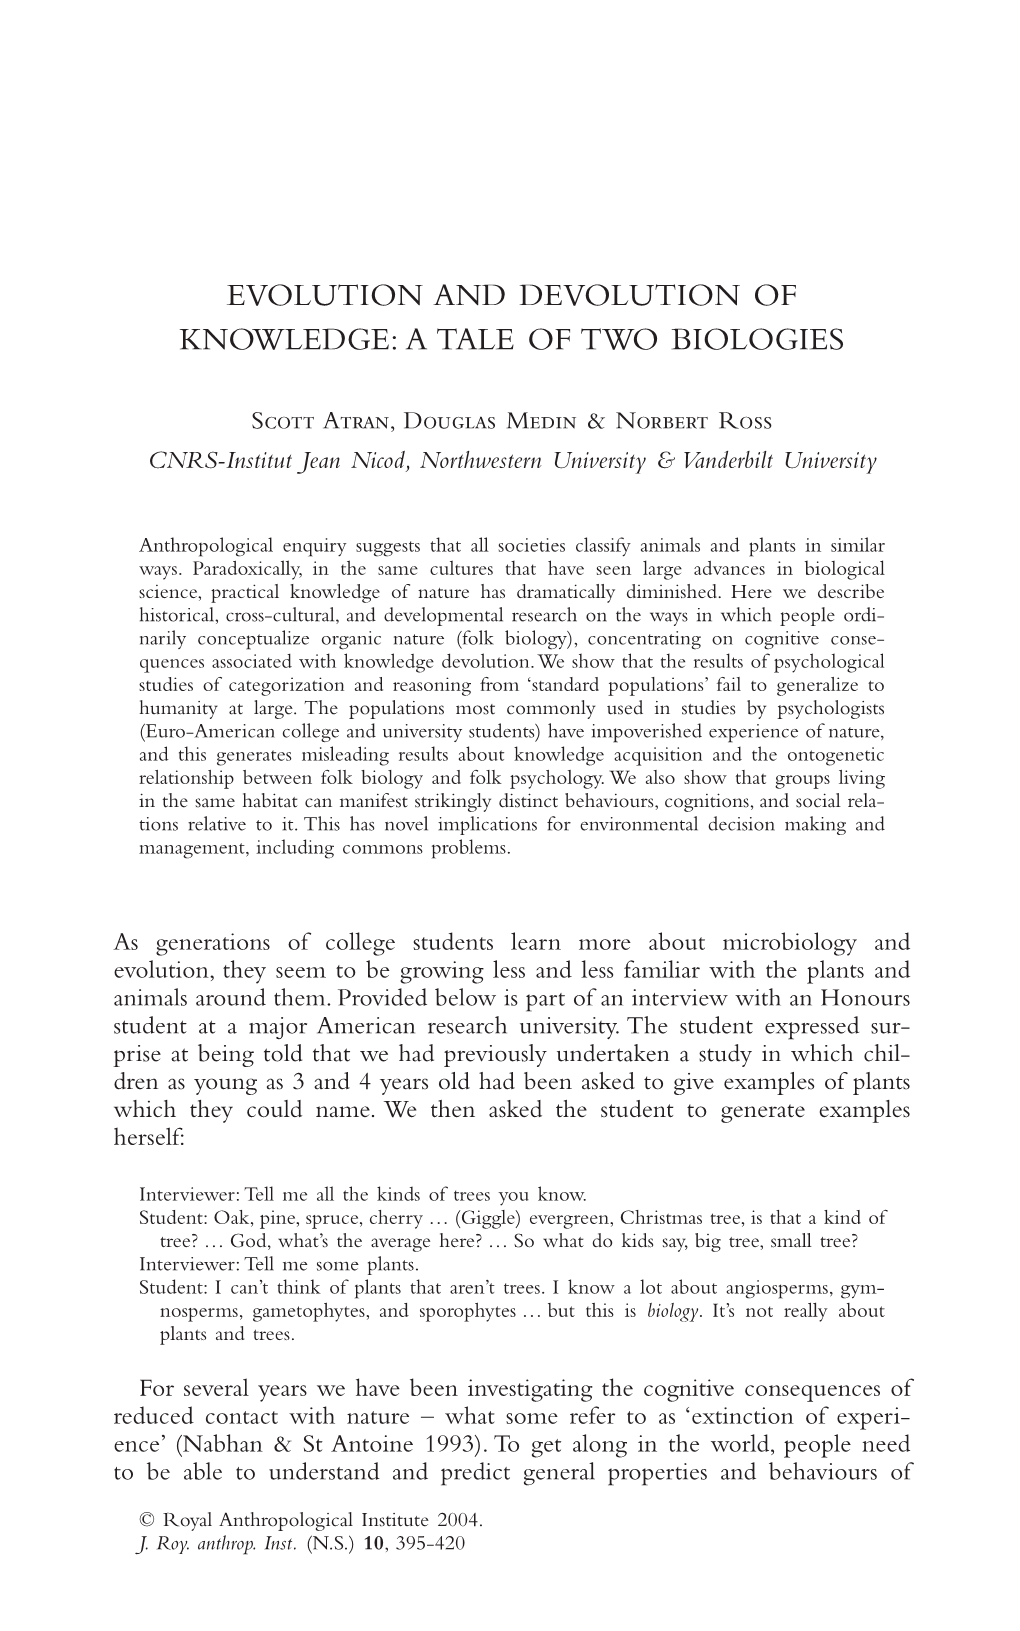 Evolution and Devolution of Knowledge: a Tale of Two Biologies